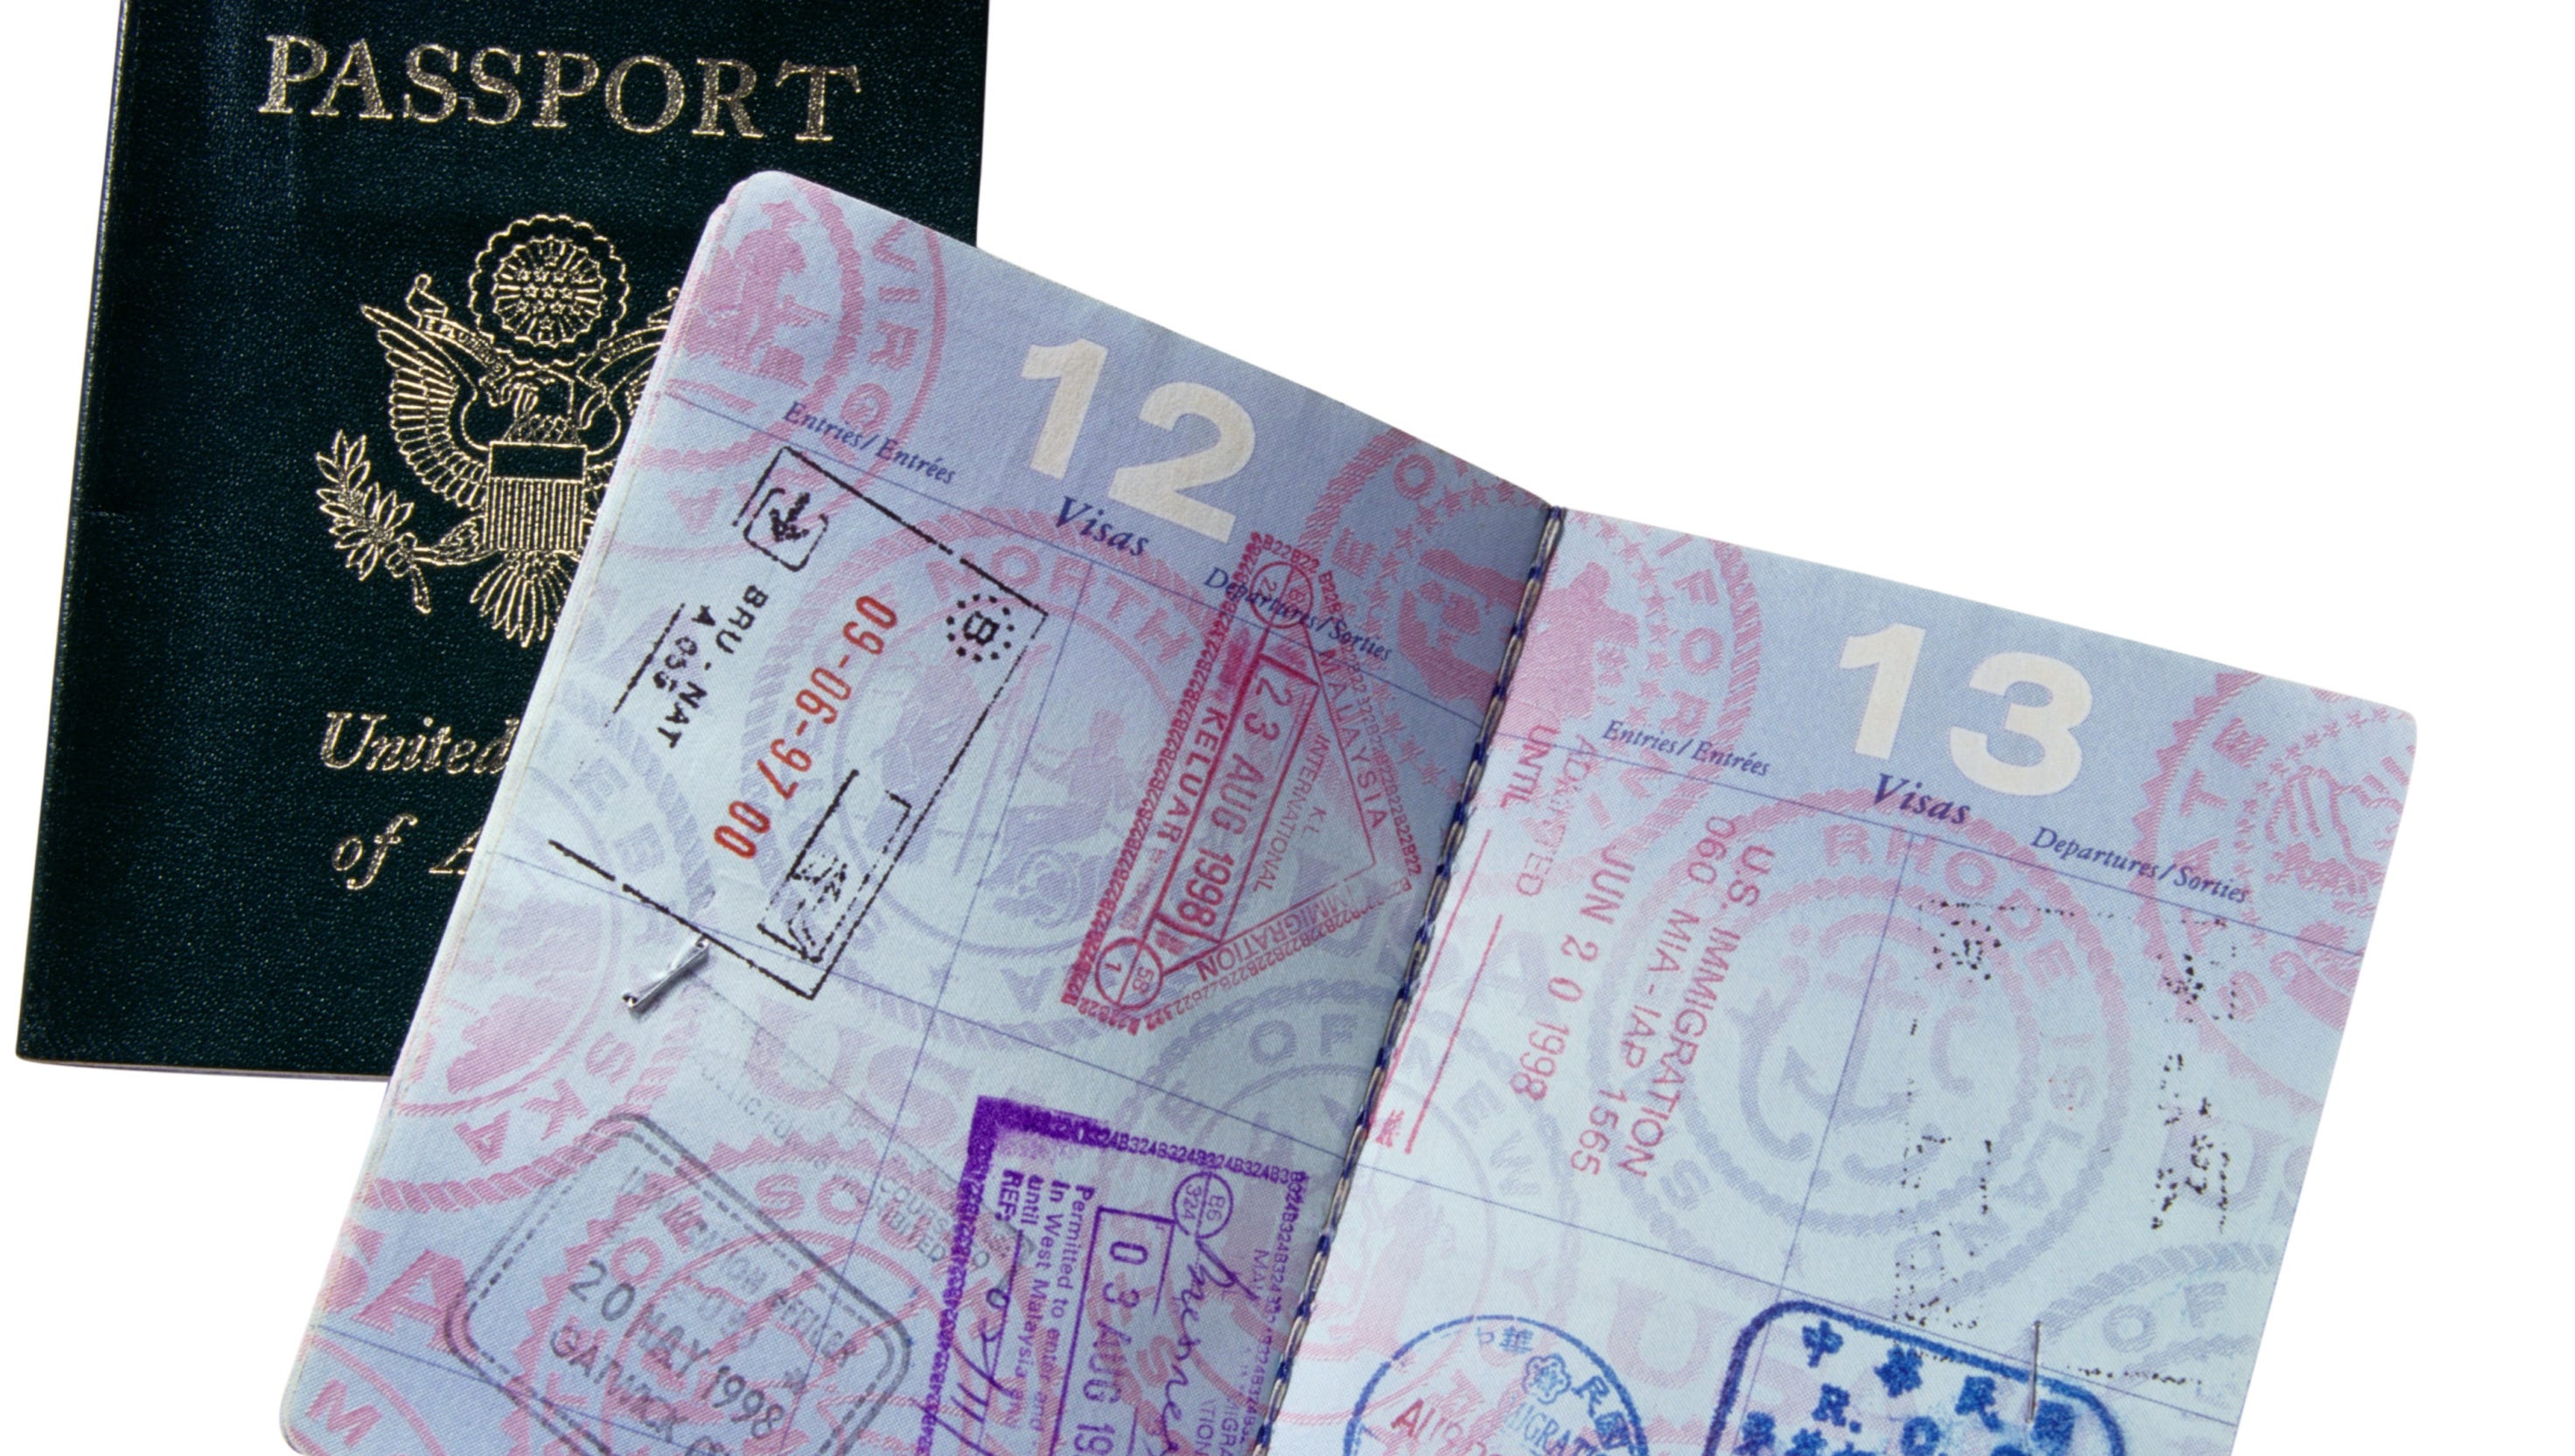 Passport 101: How to apply, renew or replace